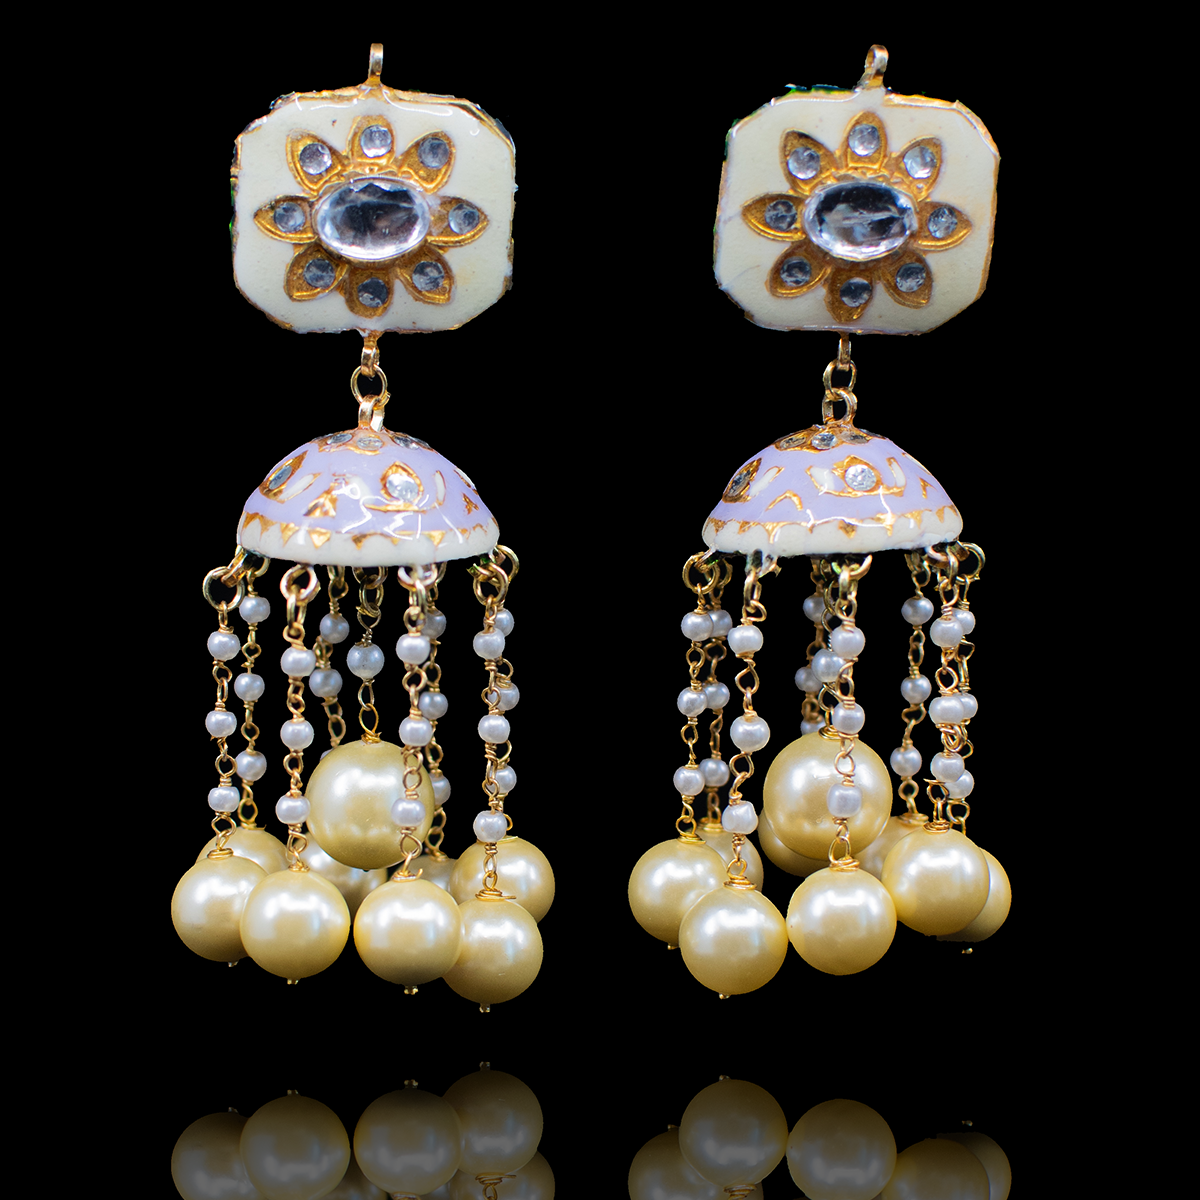 Layla Earrings - Available in 2 Colors